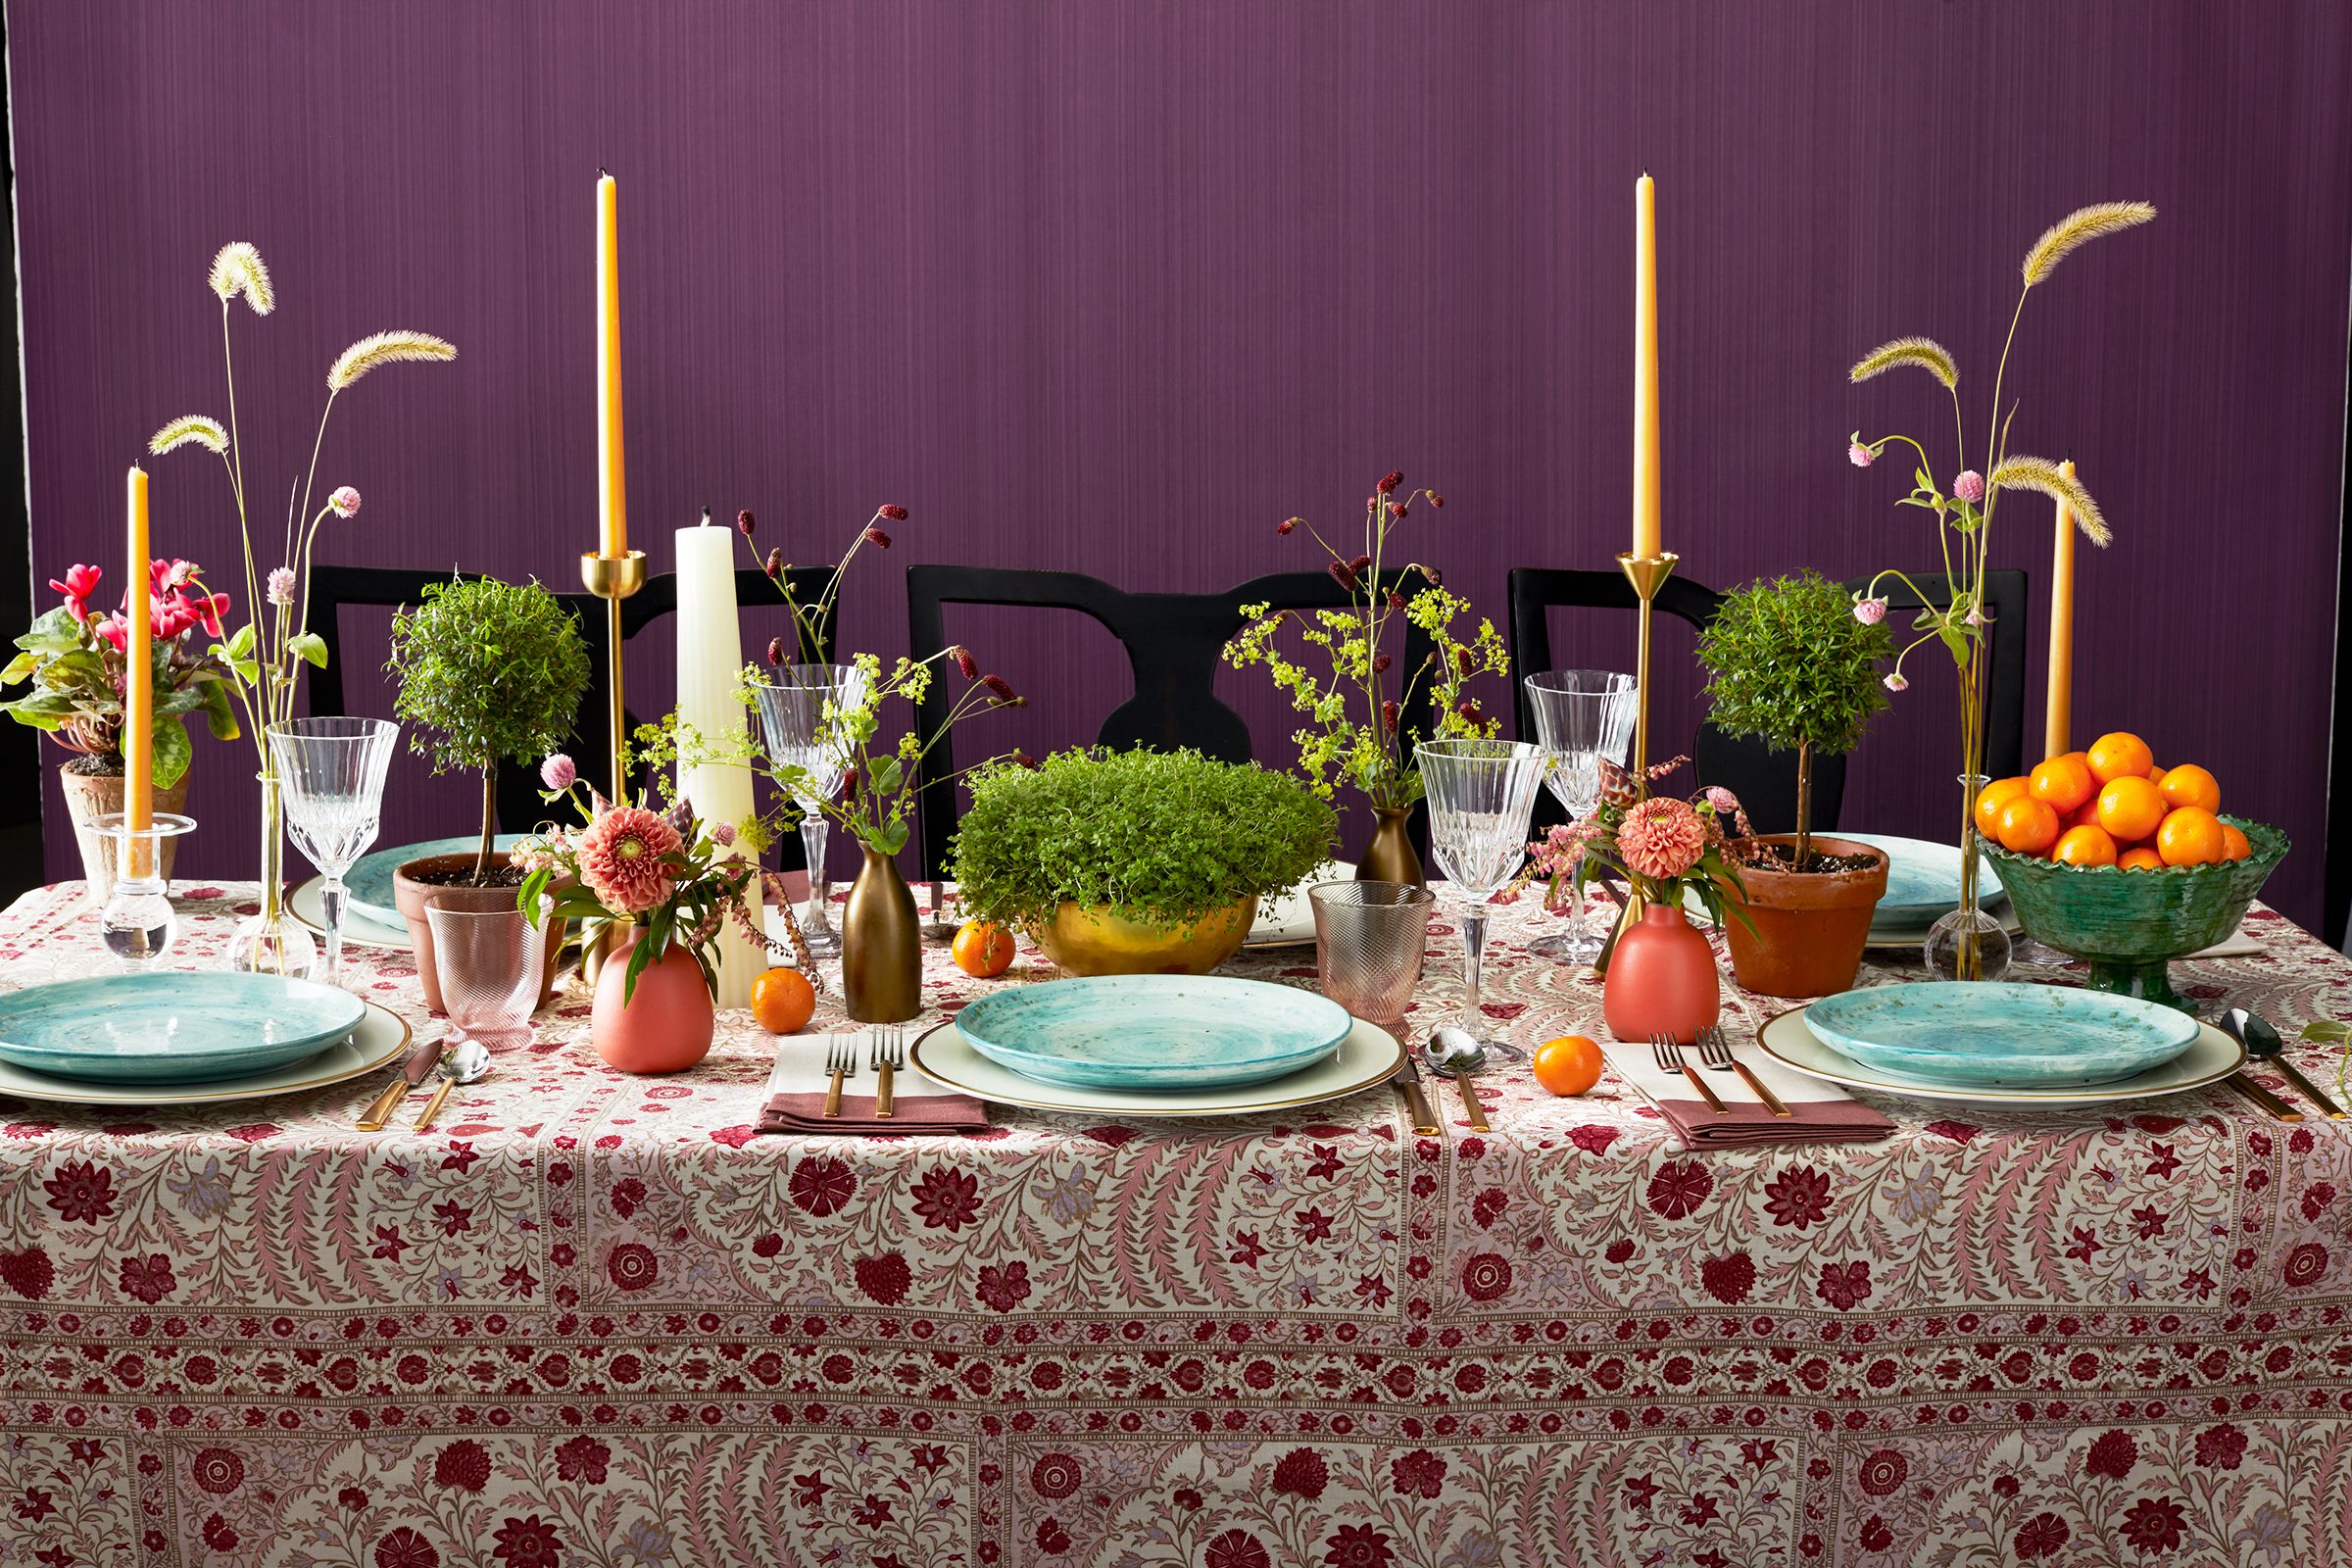 25 Beautiful Spring Table Setting Ideas - Stylish Spring Centerpieces -